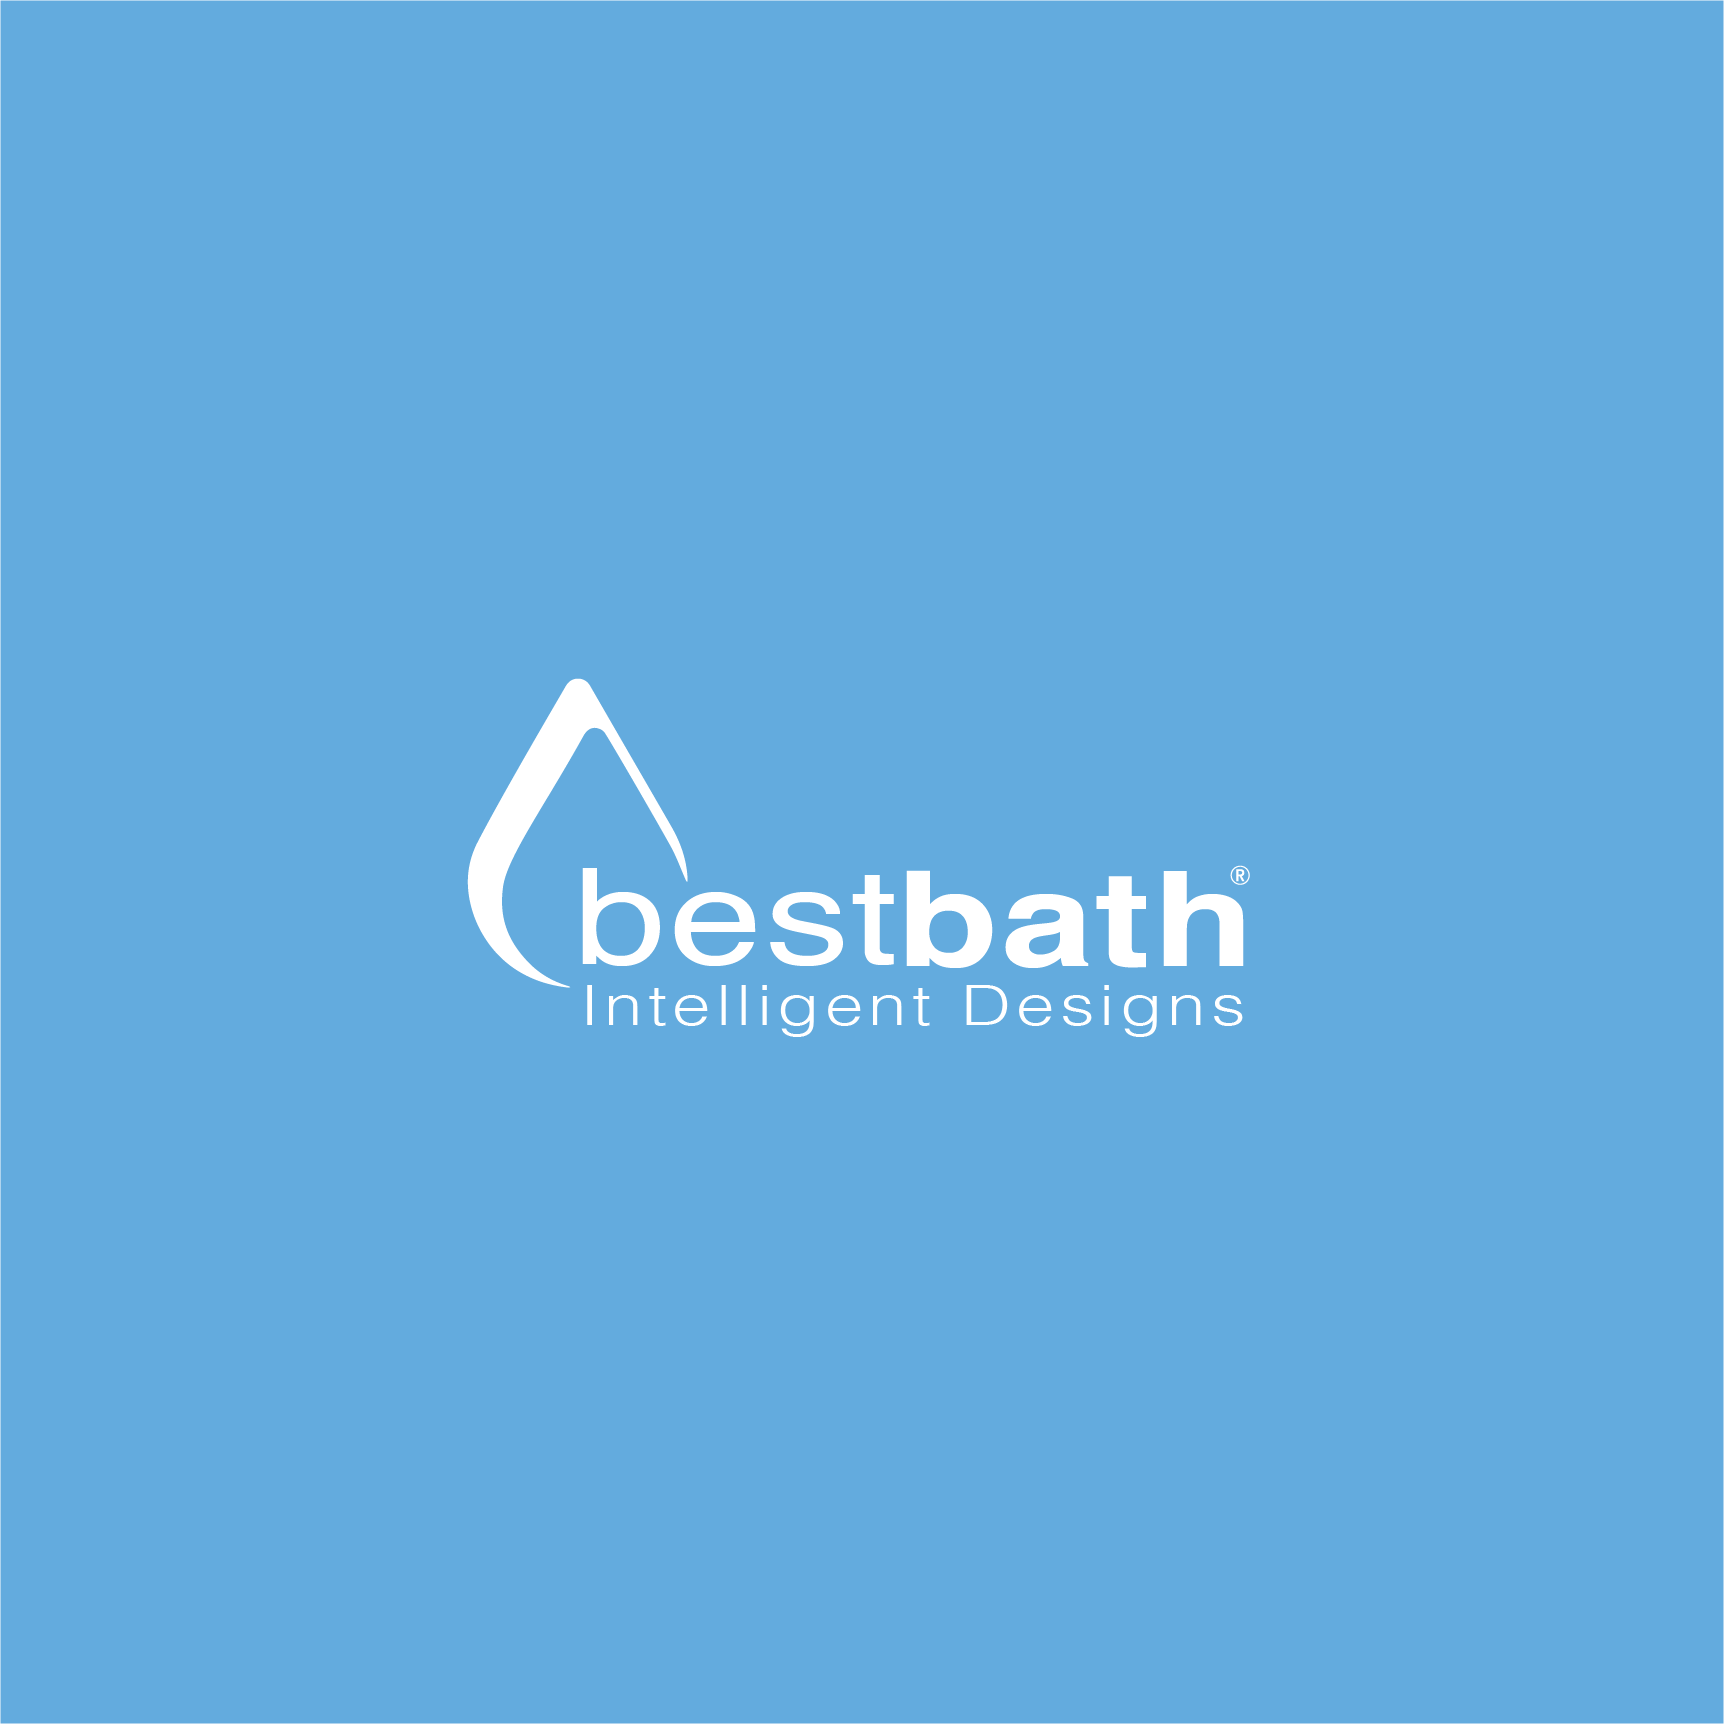 Bestbath’s “Need It Now” Packages